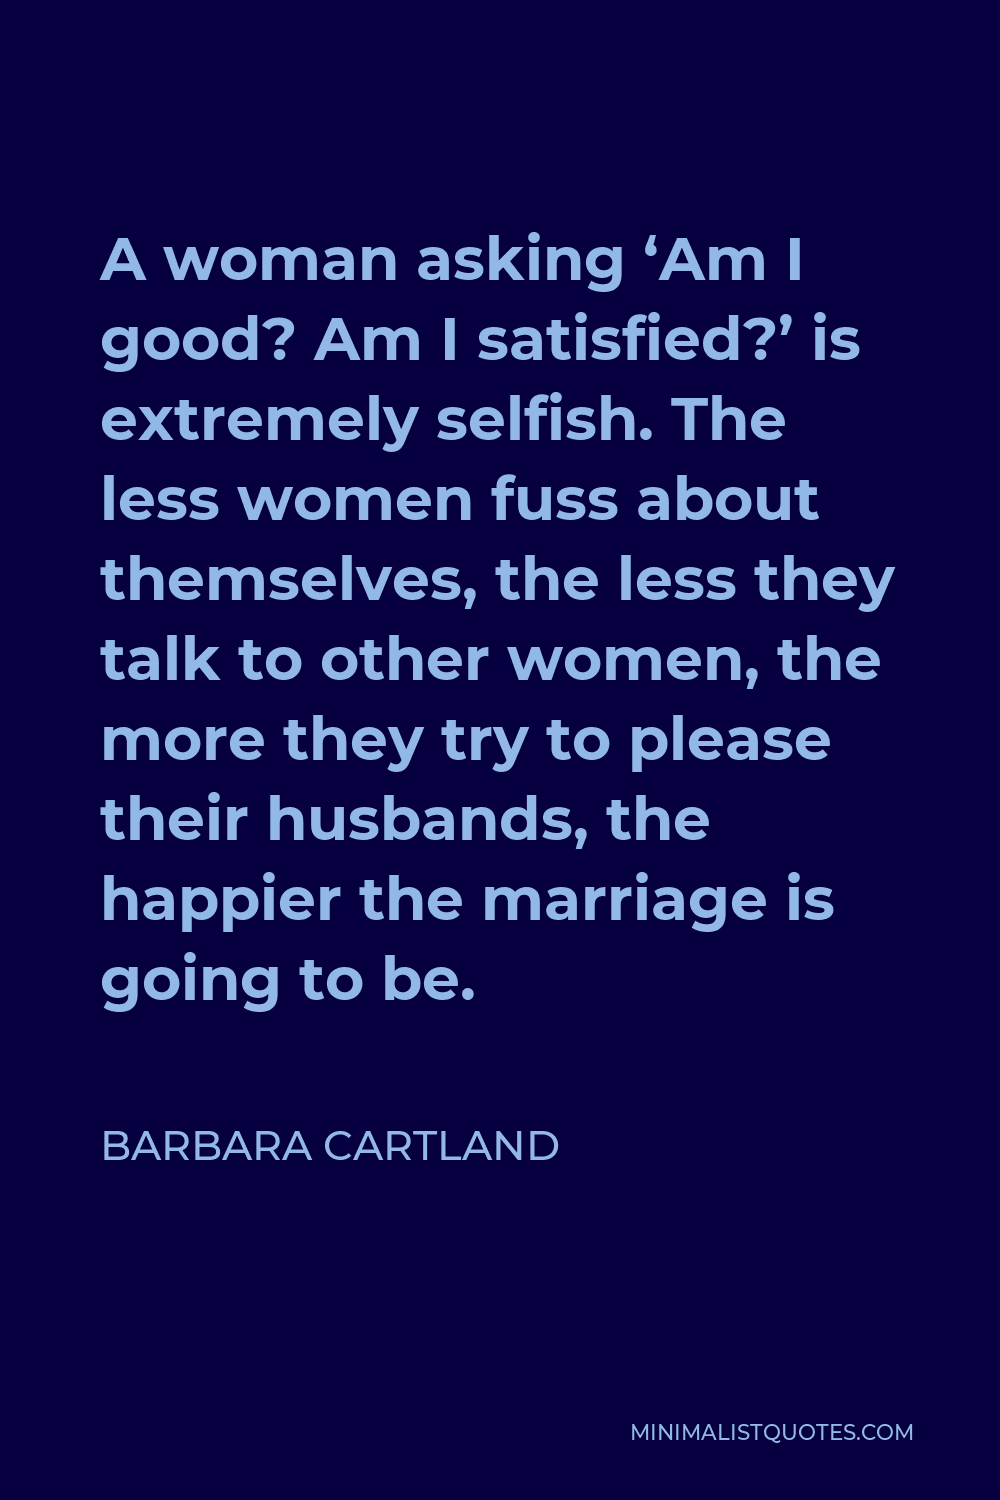 Barbara Cartland Quote - A woman asking ‘Am I good? Am I satisfied?’ is extremely selfish. The less women fuss about themselves, the less they talk to other women, the more they try to please their husbands, the happier the marriage is going to be.